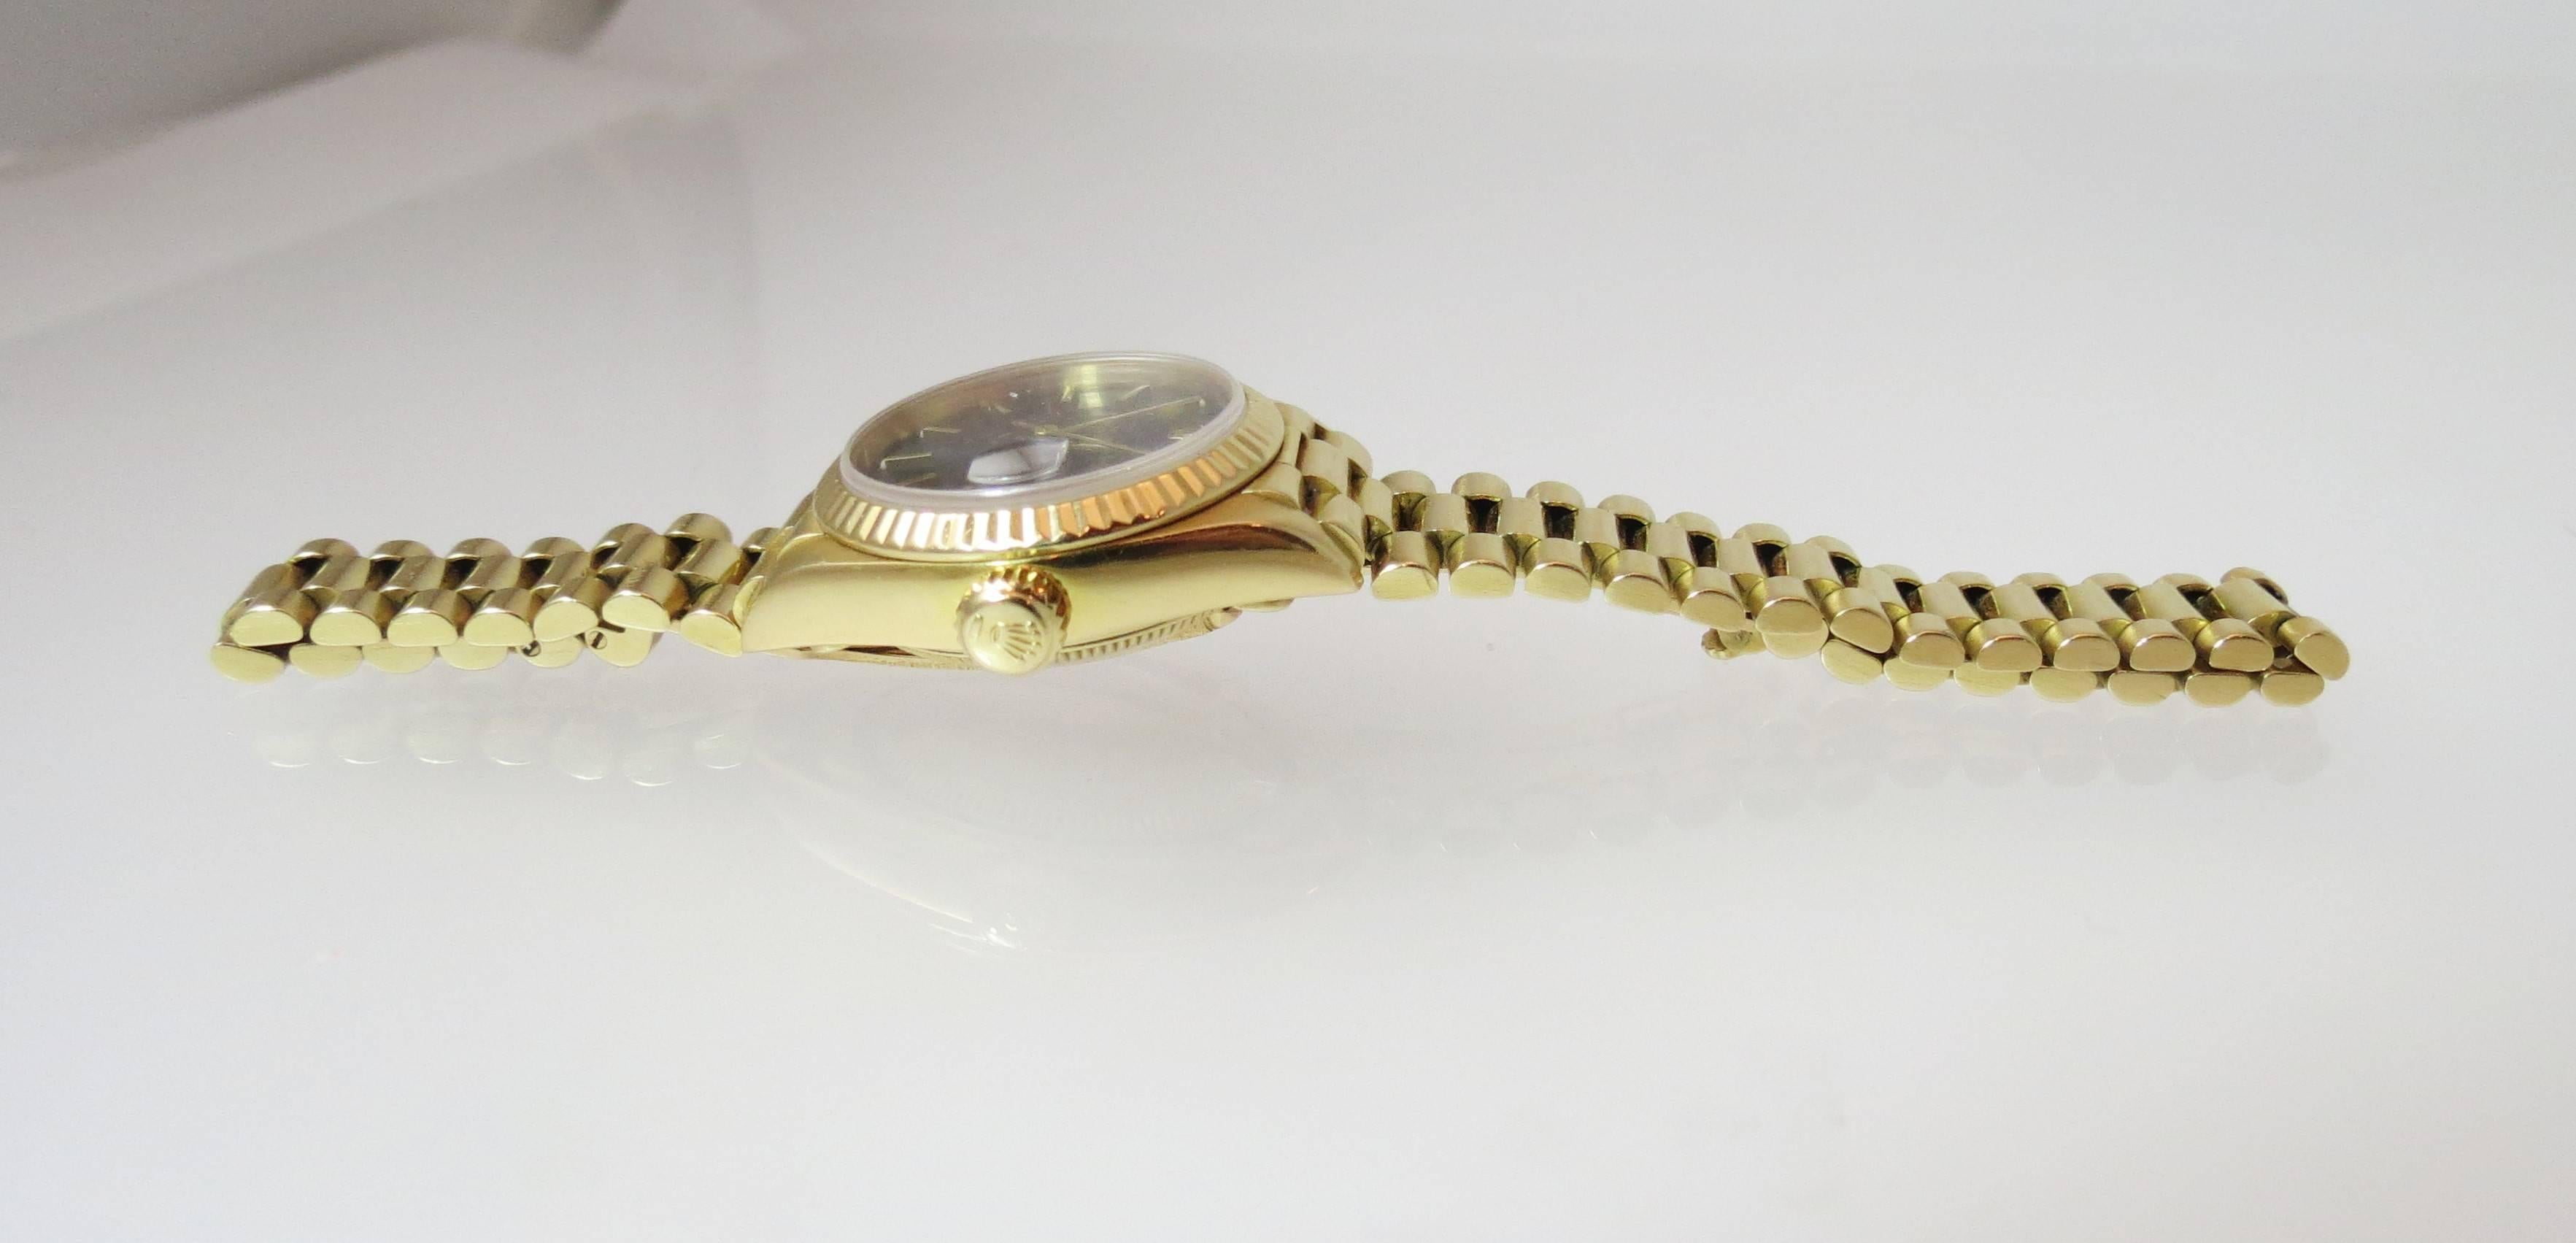 Women's Rolex, Pre-owned 18K Yellow Gold Rolex Oyster Perpetual Datejust Bracelet Watch